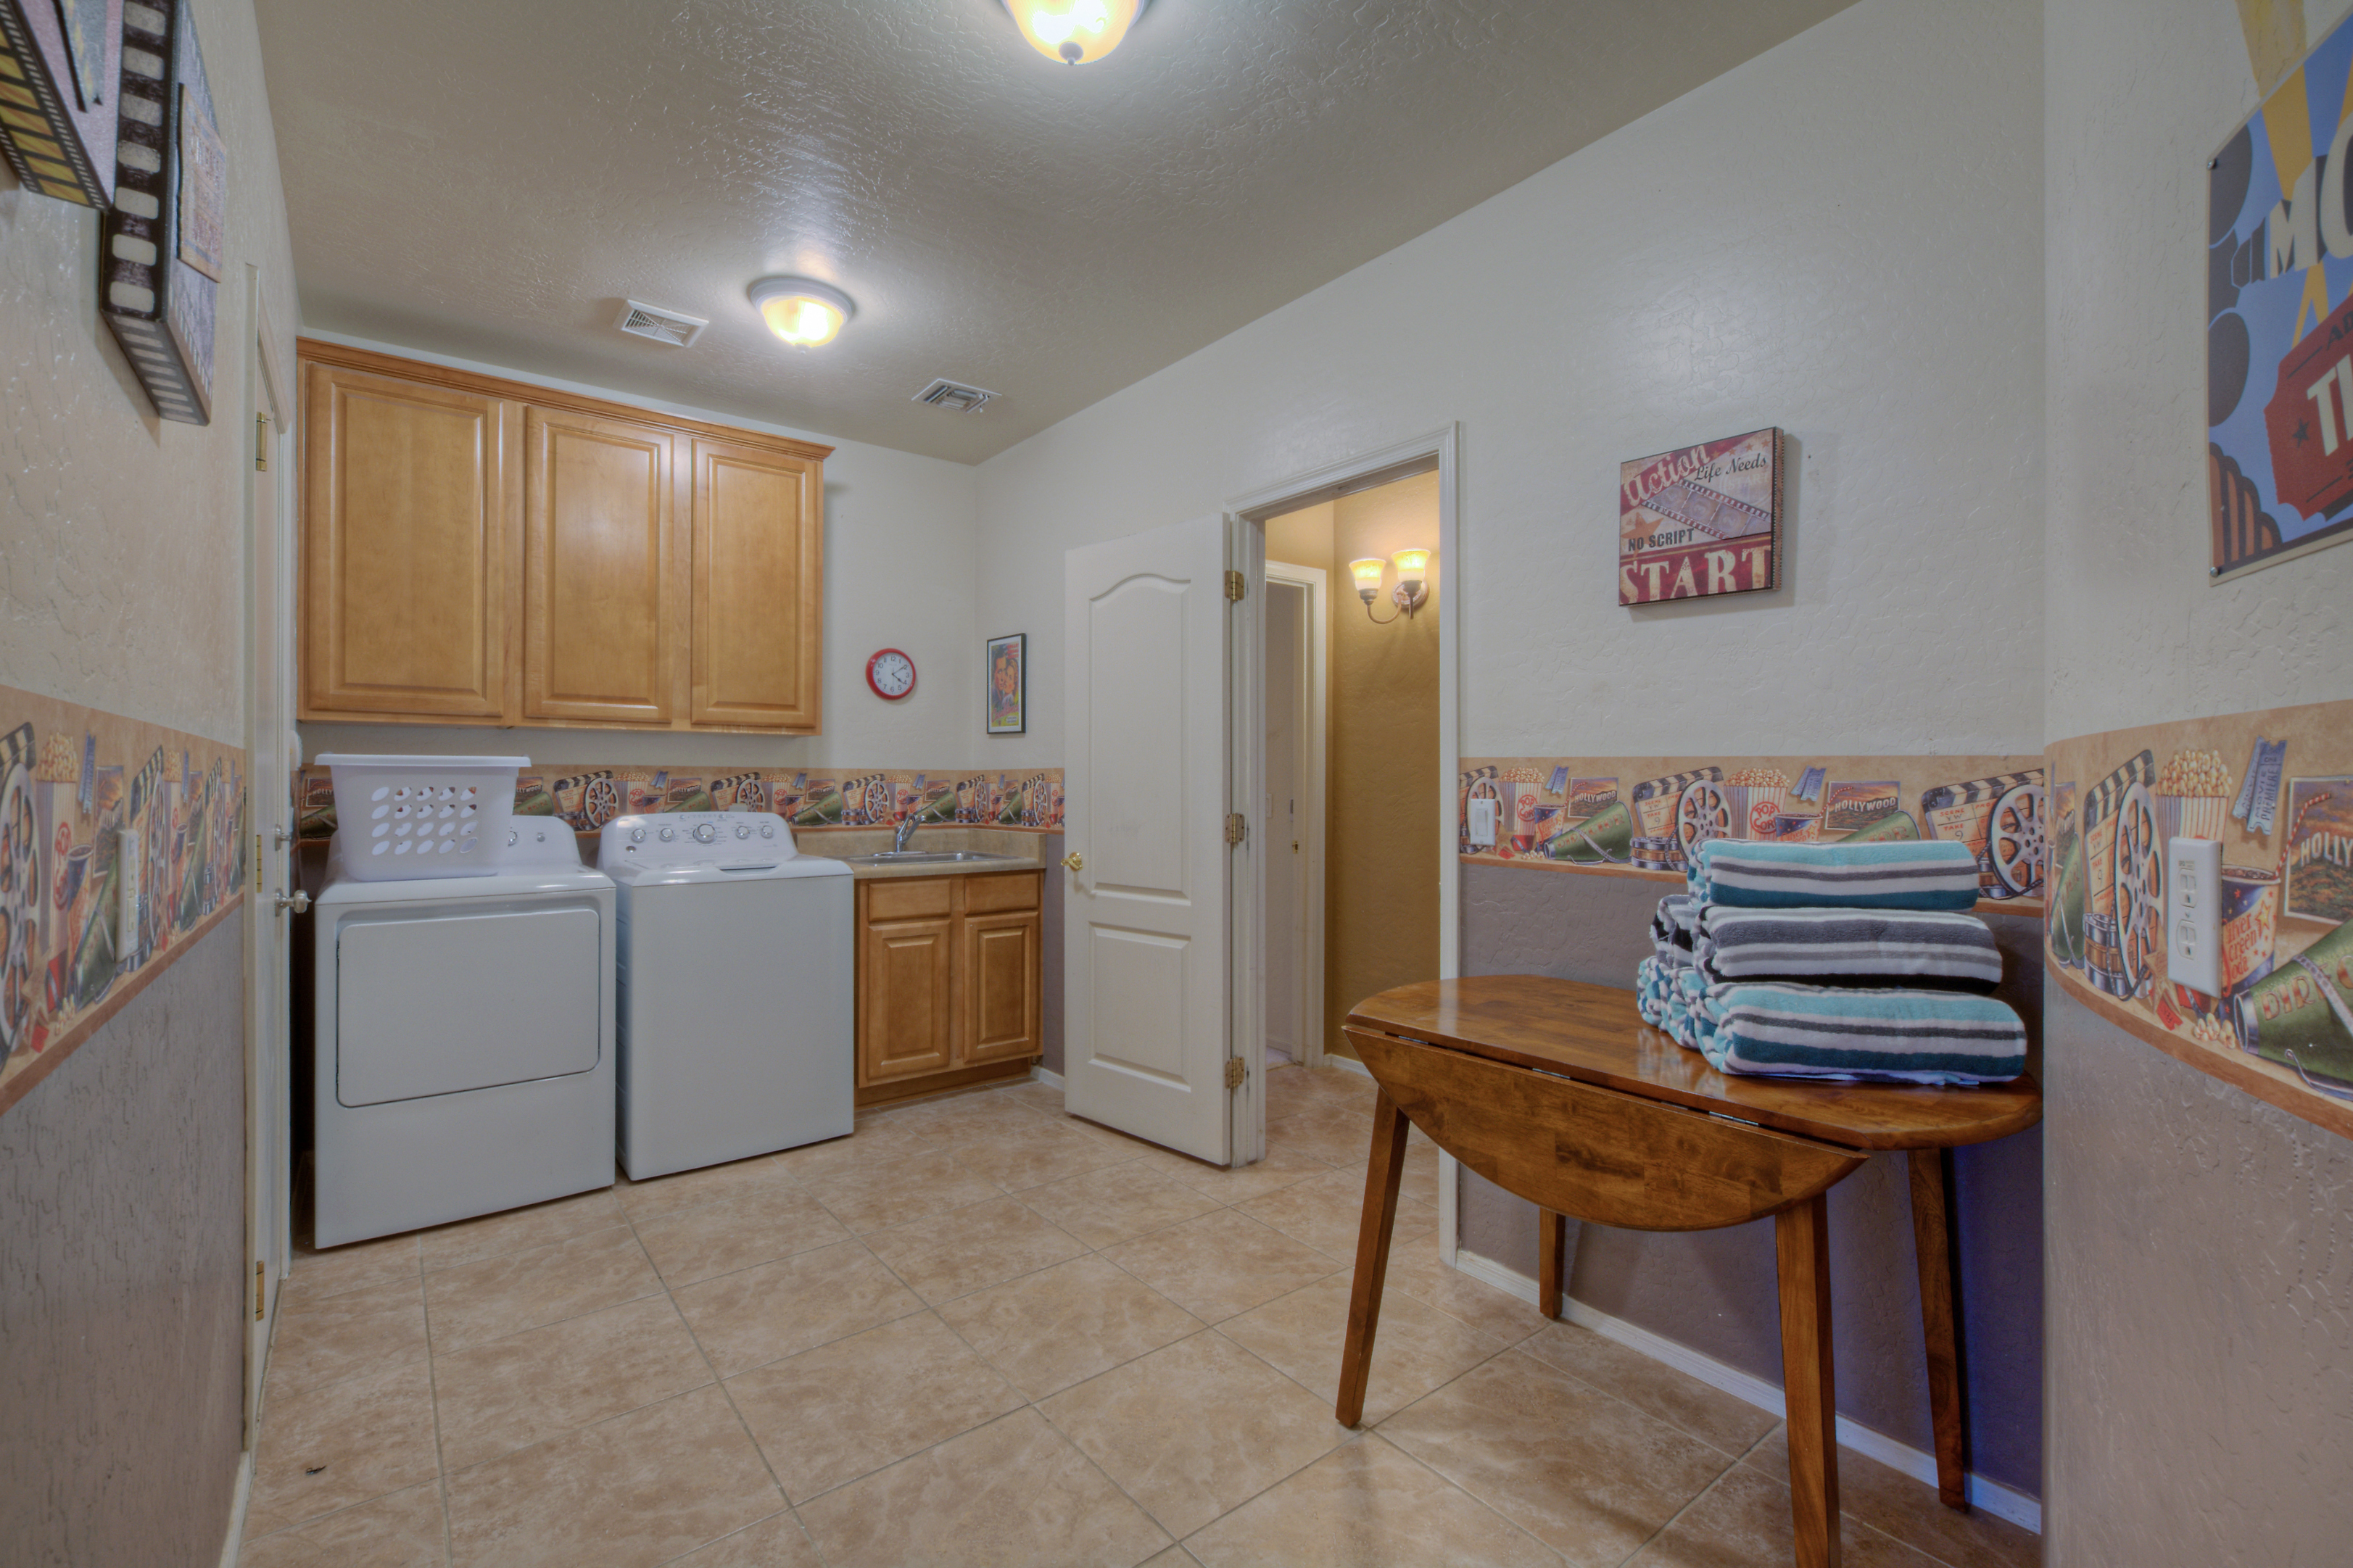 Well stocked laundry room with detergent is on the ground floor and will help you keep your wardrobe ready for the next Arizona adventure.